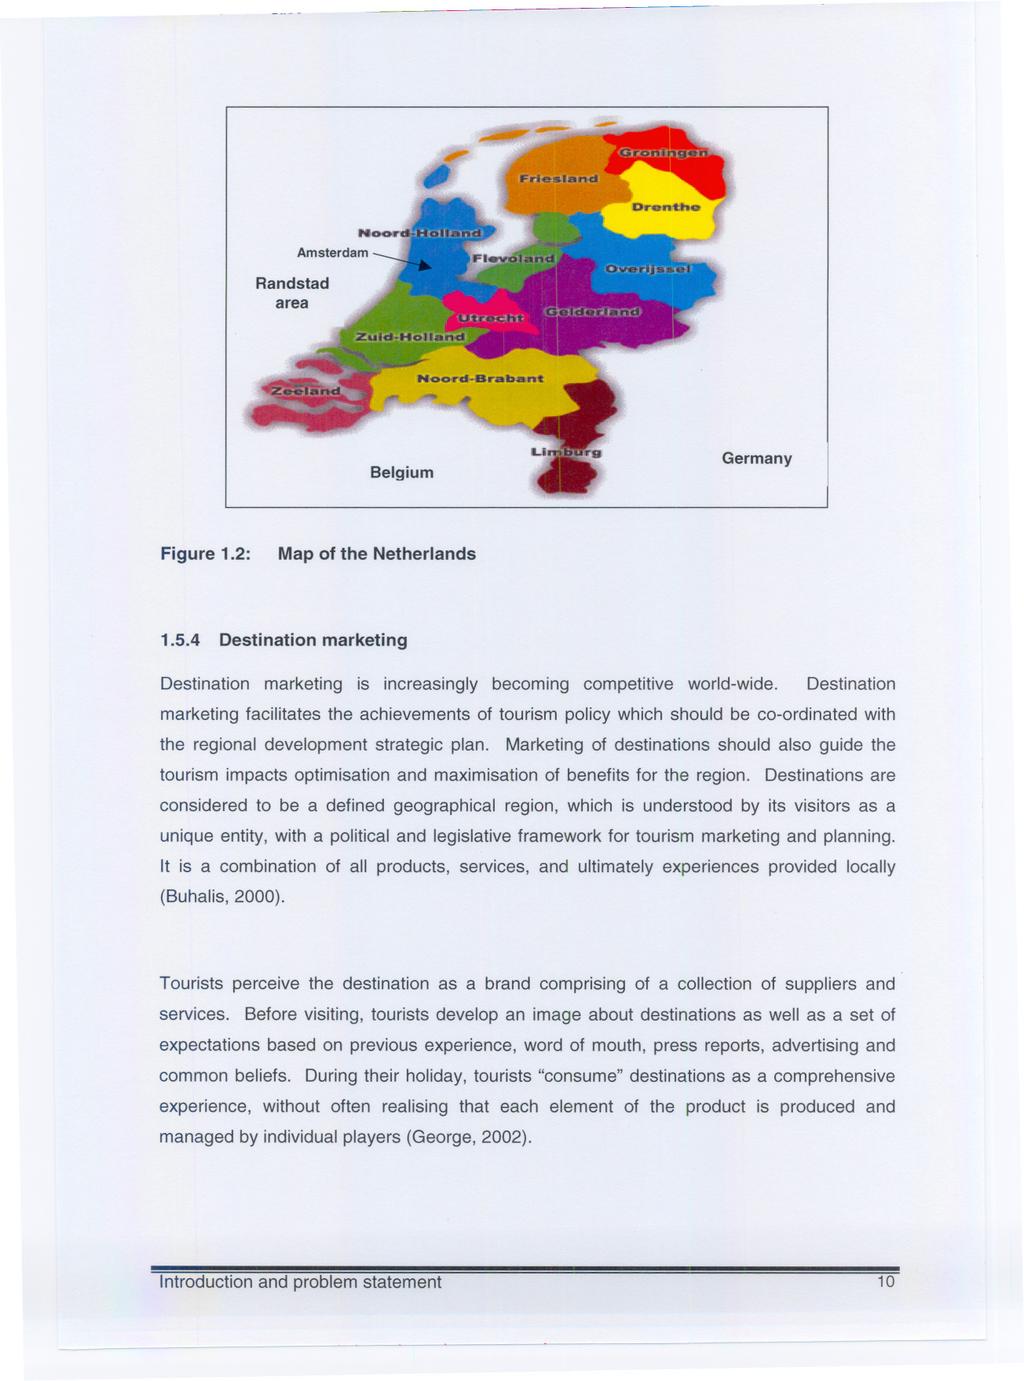 Randstad area Belgium Germany Figure 1.2: Map of the Netherlands 1.5.4 Destination marketing Destination marketing is increasingly becoming competitive world-wide.